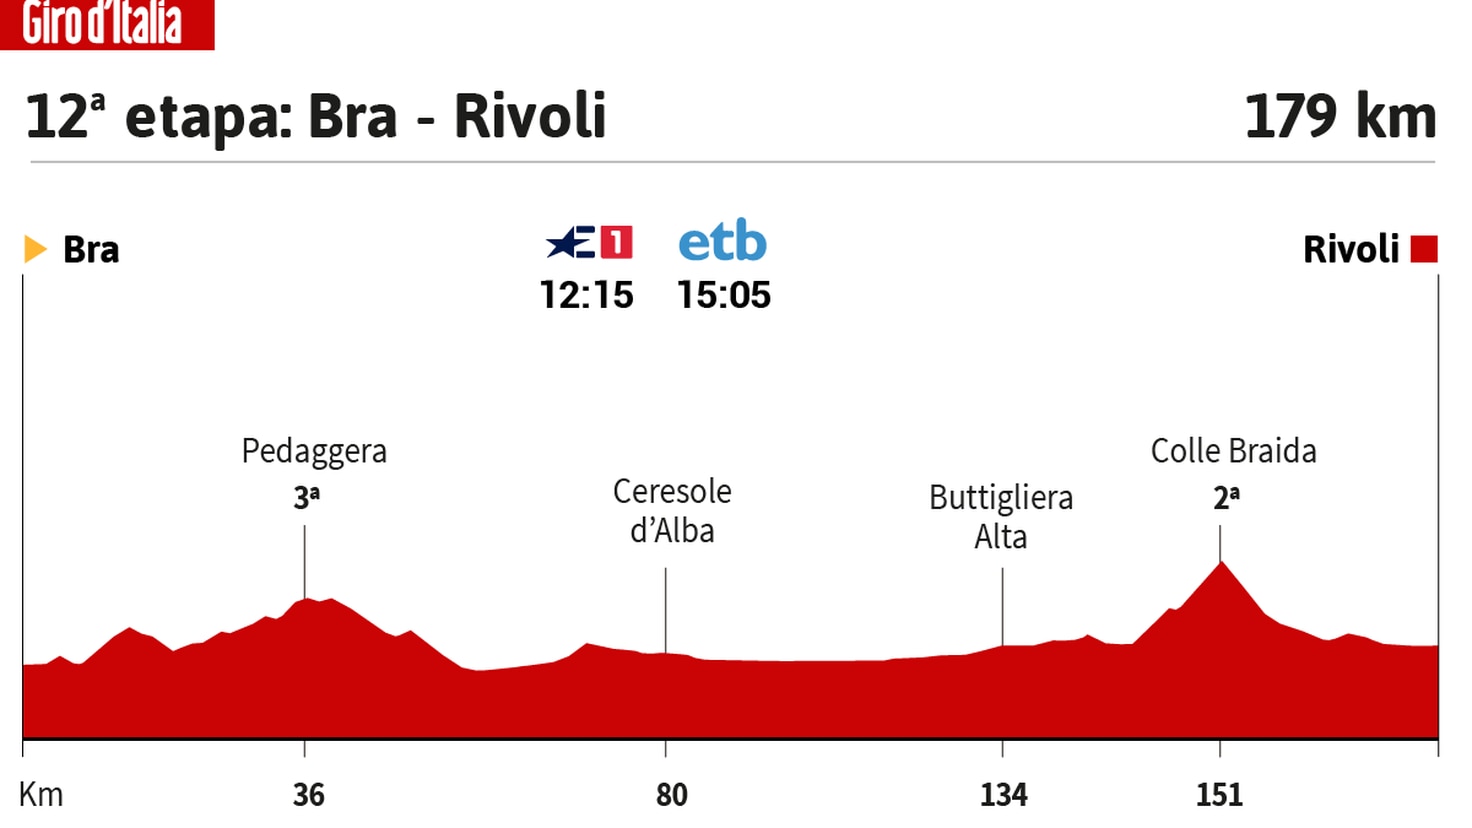 Giro d'Italia today, stage 12: schedule, profile and route
